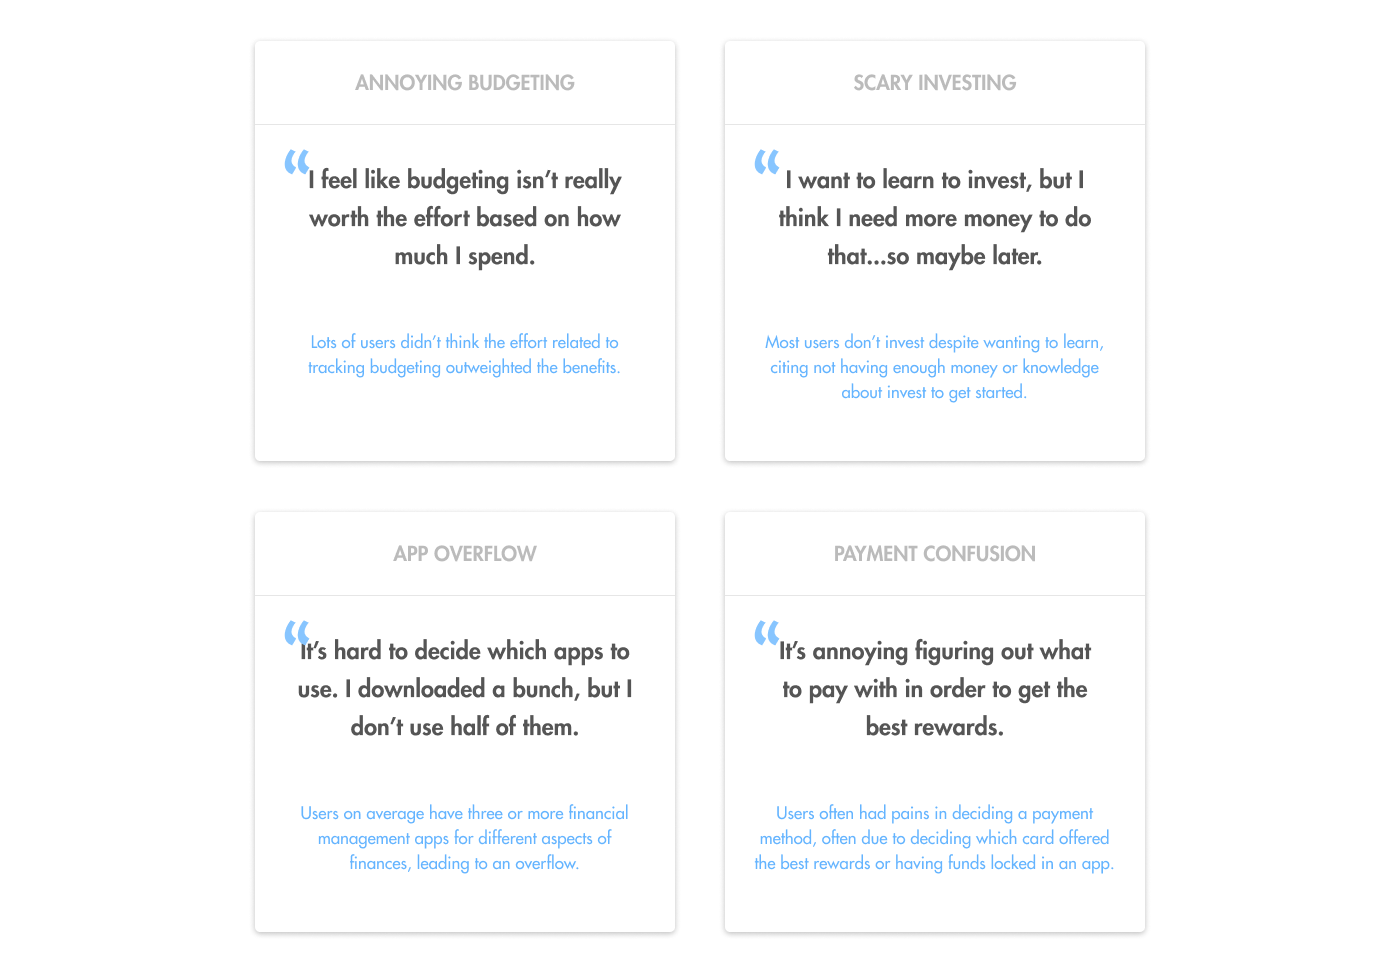 Quotes from users about four key problems